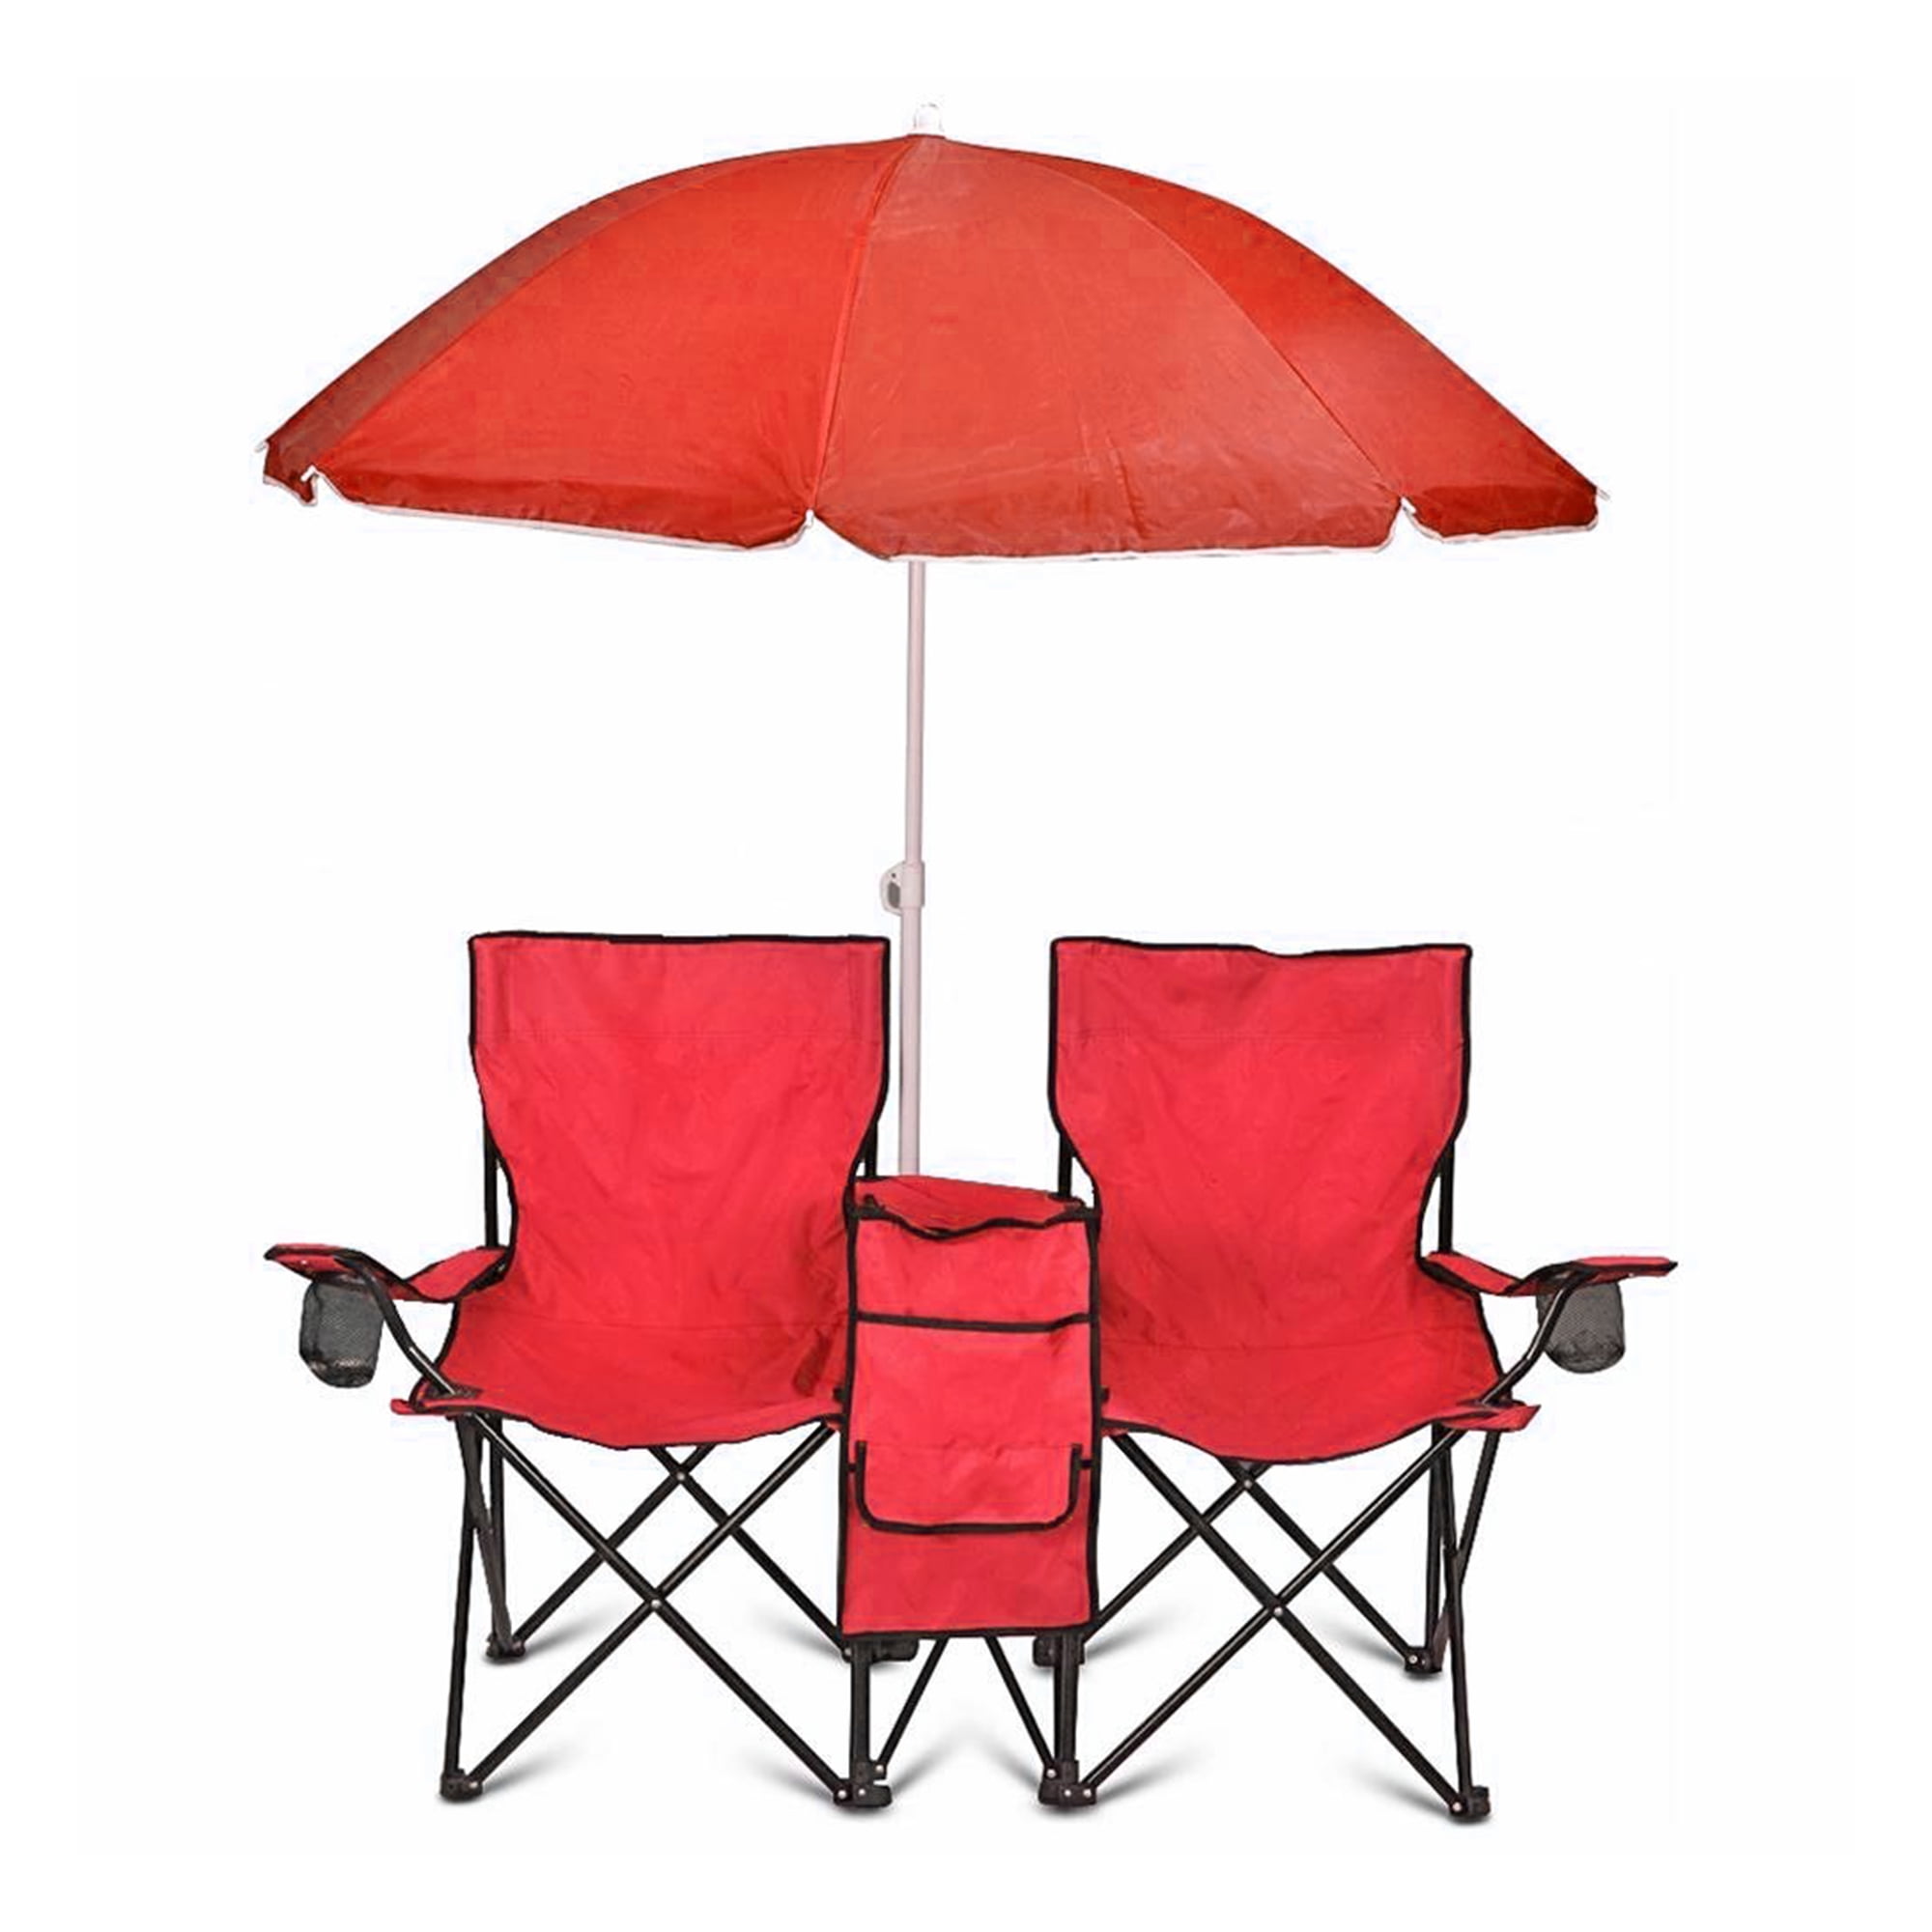 2020 2021 chairs on beach w umbrella 2-Year 3x6 Monthly pocket calendar w cover 